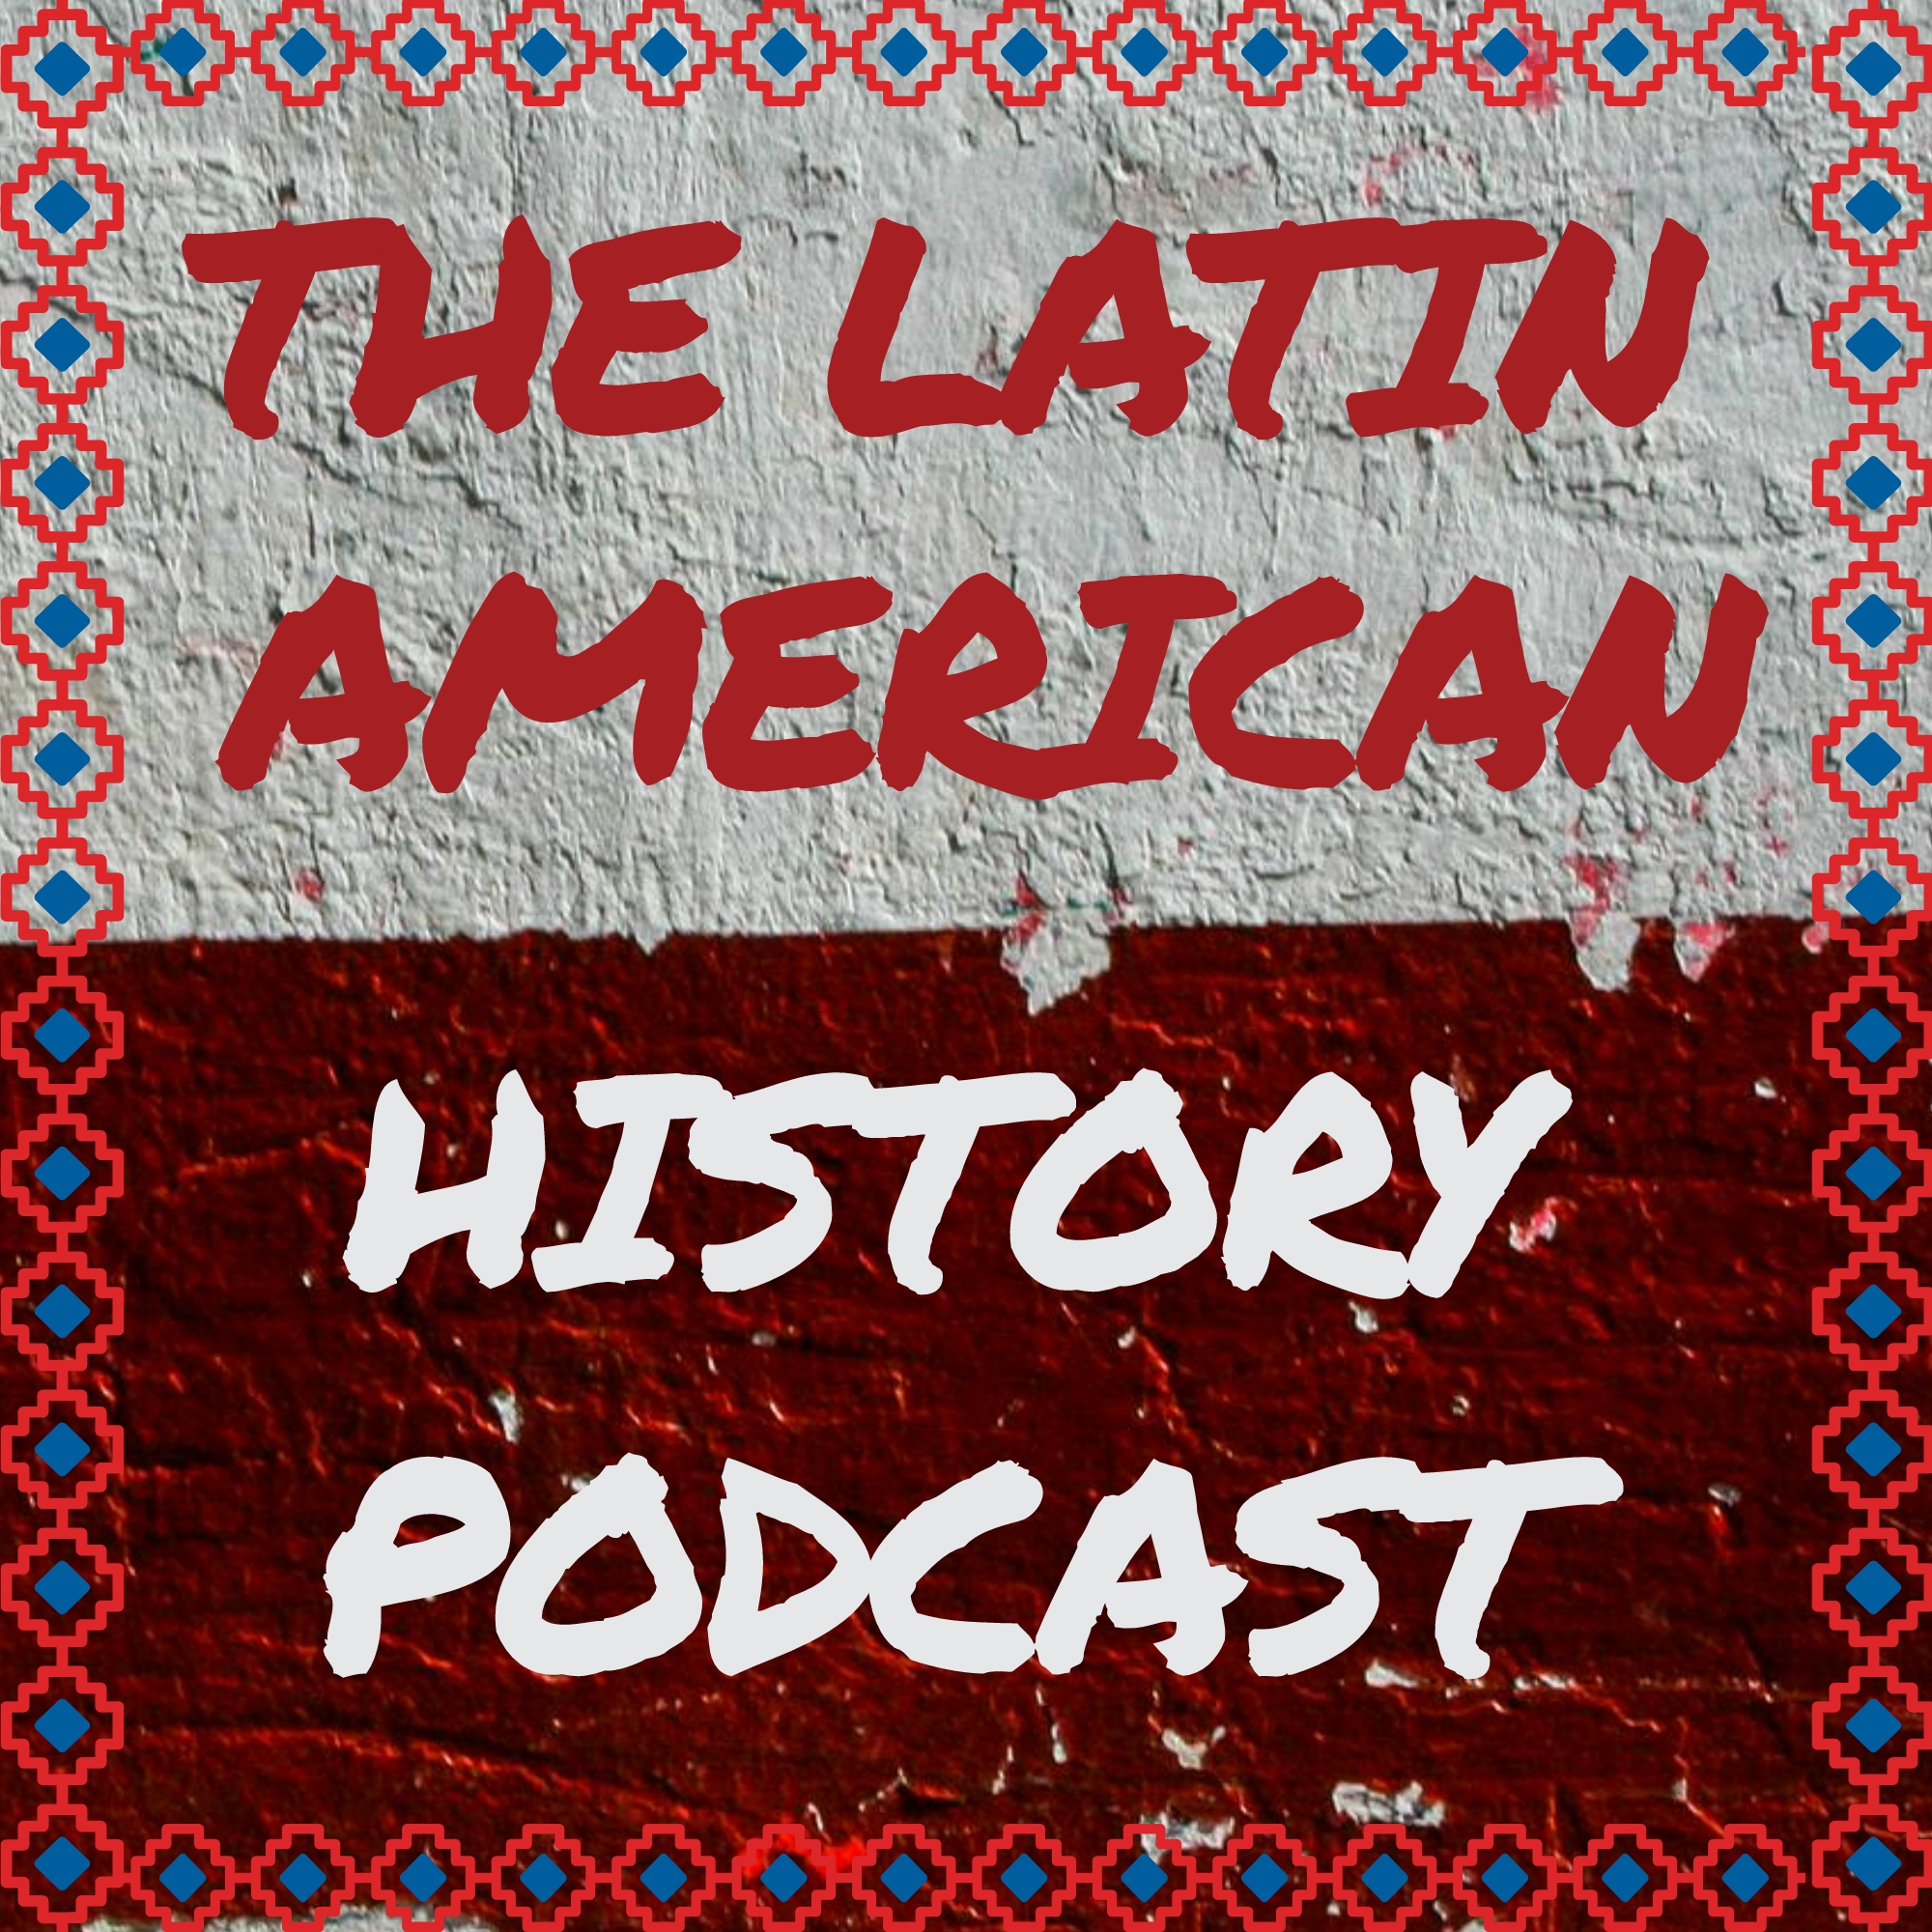 52. When Latins Fight - An Interview with Walter Molano